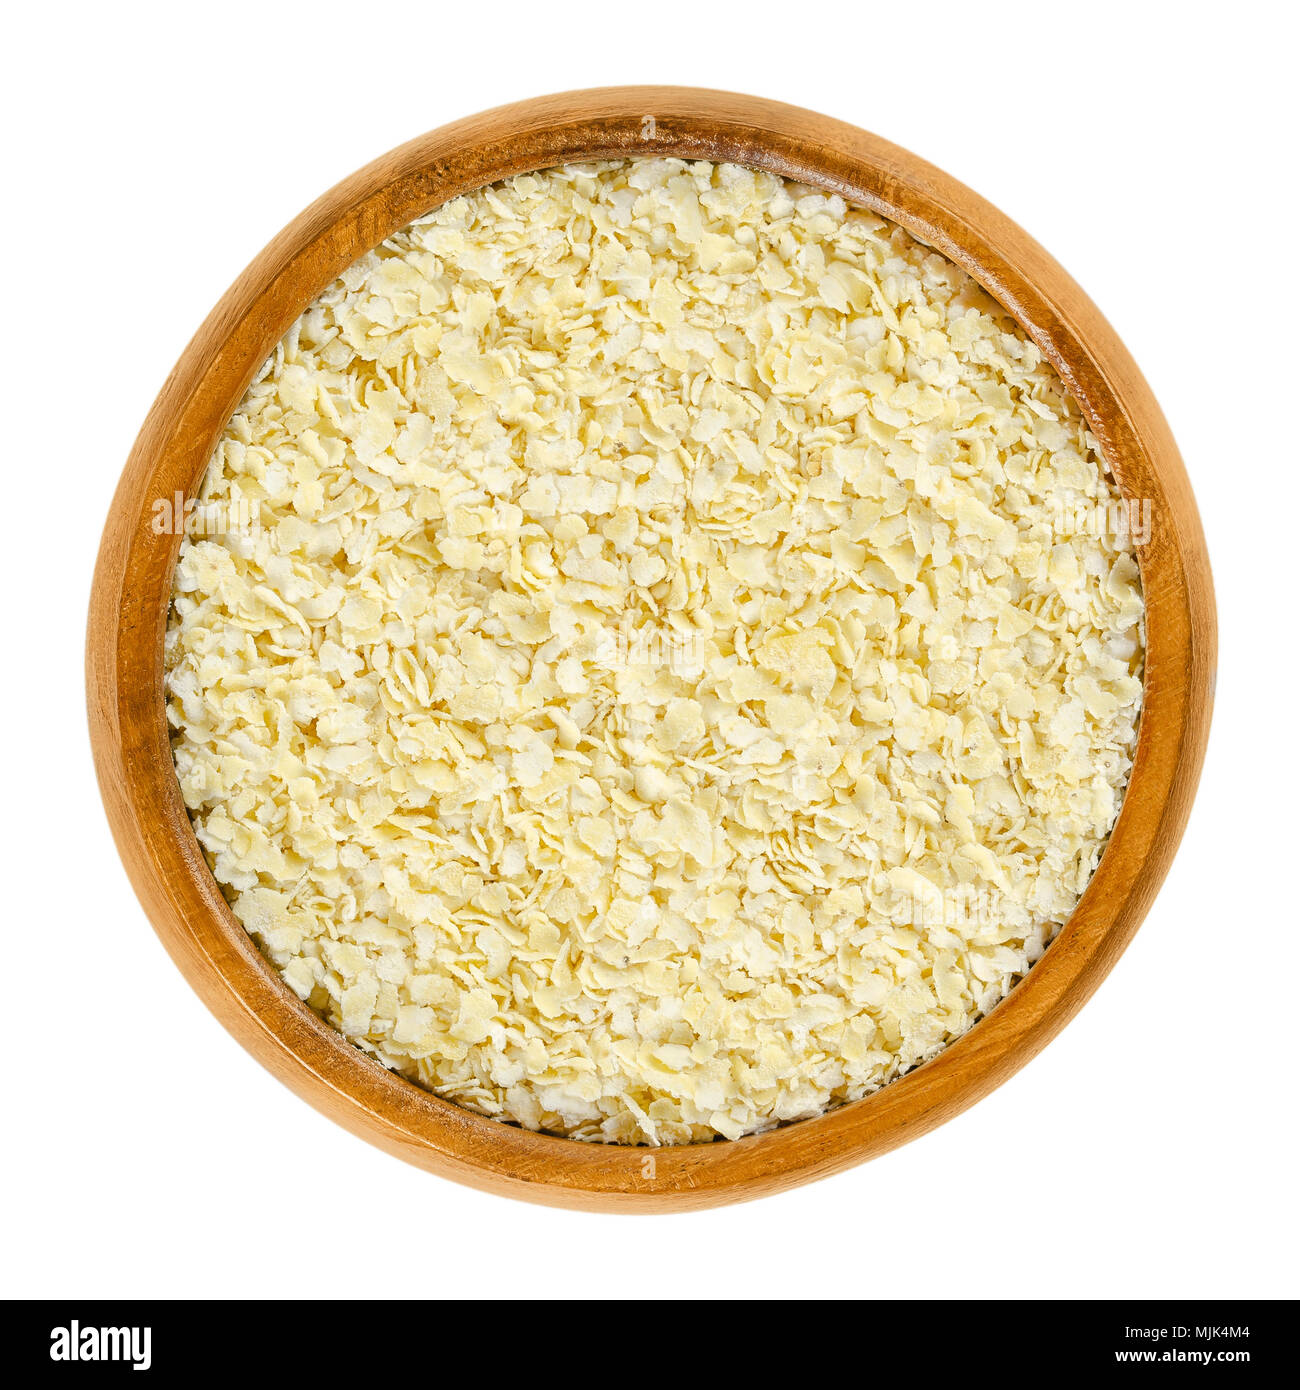 Millet flakes in wooden bowl. Light, yellow rolled millet, used for porridge, muesli and baking. Wheat and gluten free grain. Isolated macro photo. Stock Photo